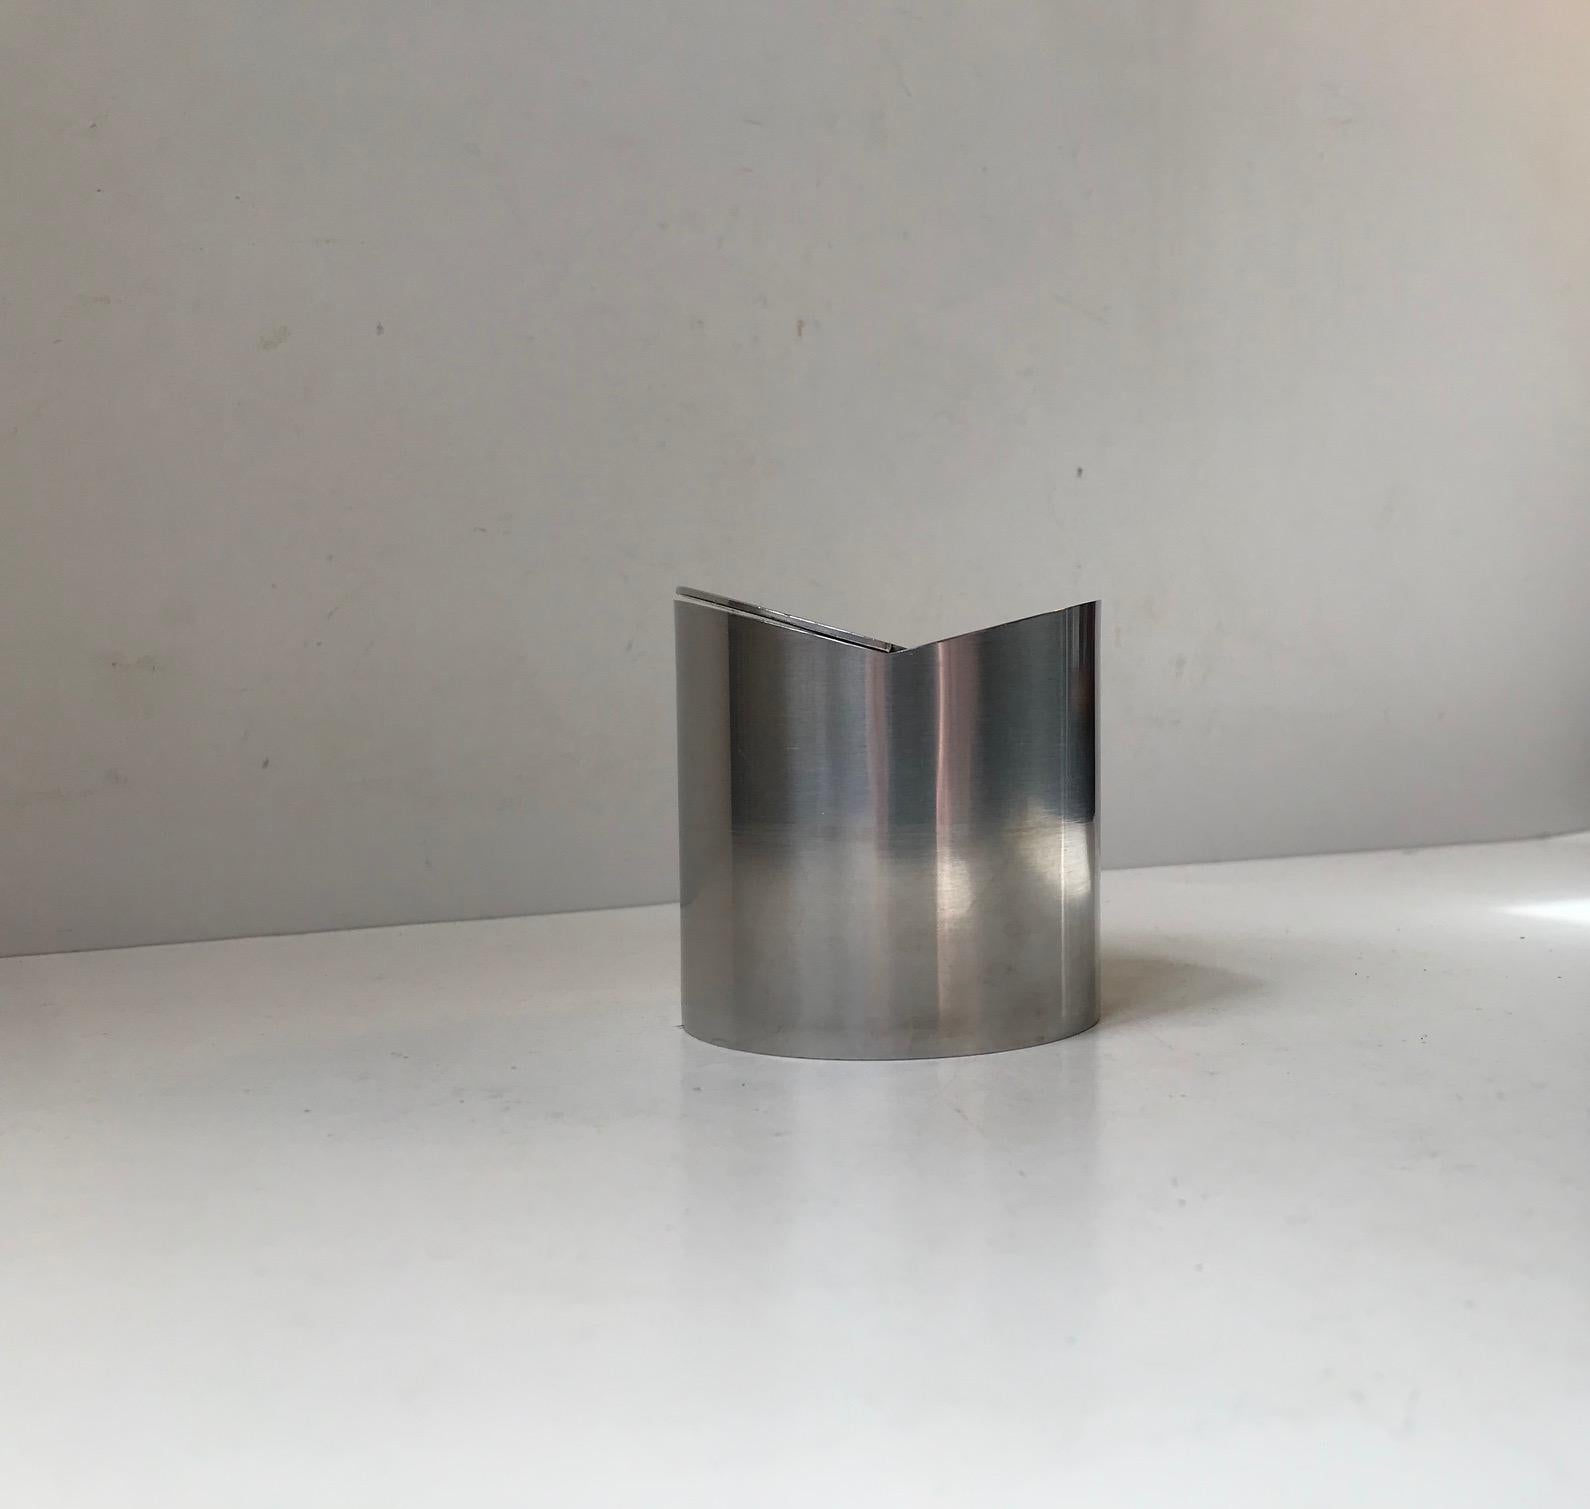 A stainless steel ashtray designed by Roelandt and manufactured by Stelton in Denmark during the 1980s. Similar to Arne Jacobsen's cylinda-line but with a tilting mechanism/lid instead. Imprinted with designer and makers marks beneath the base.